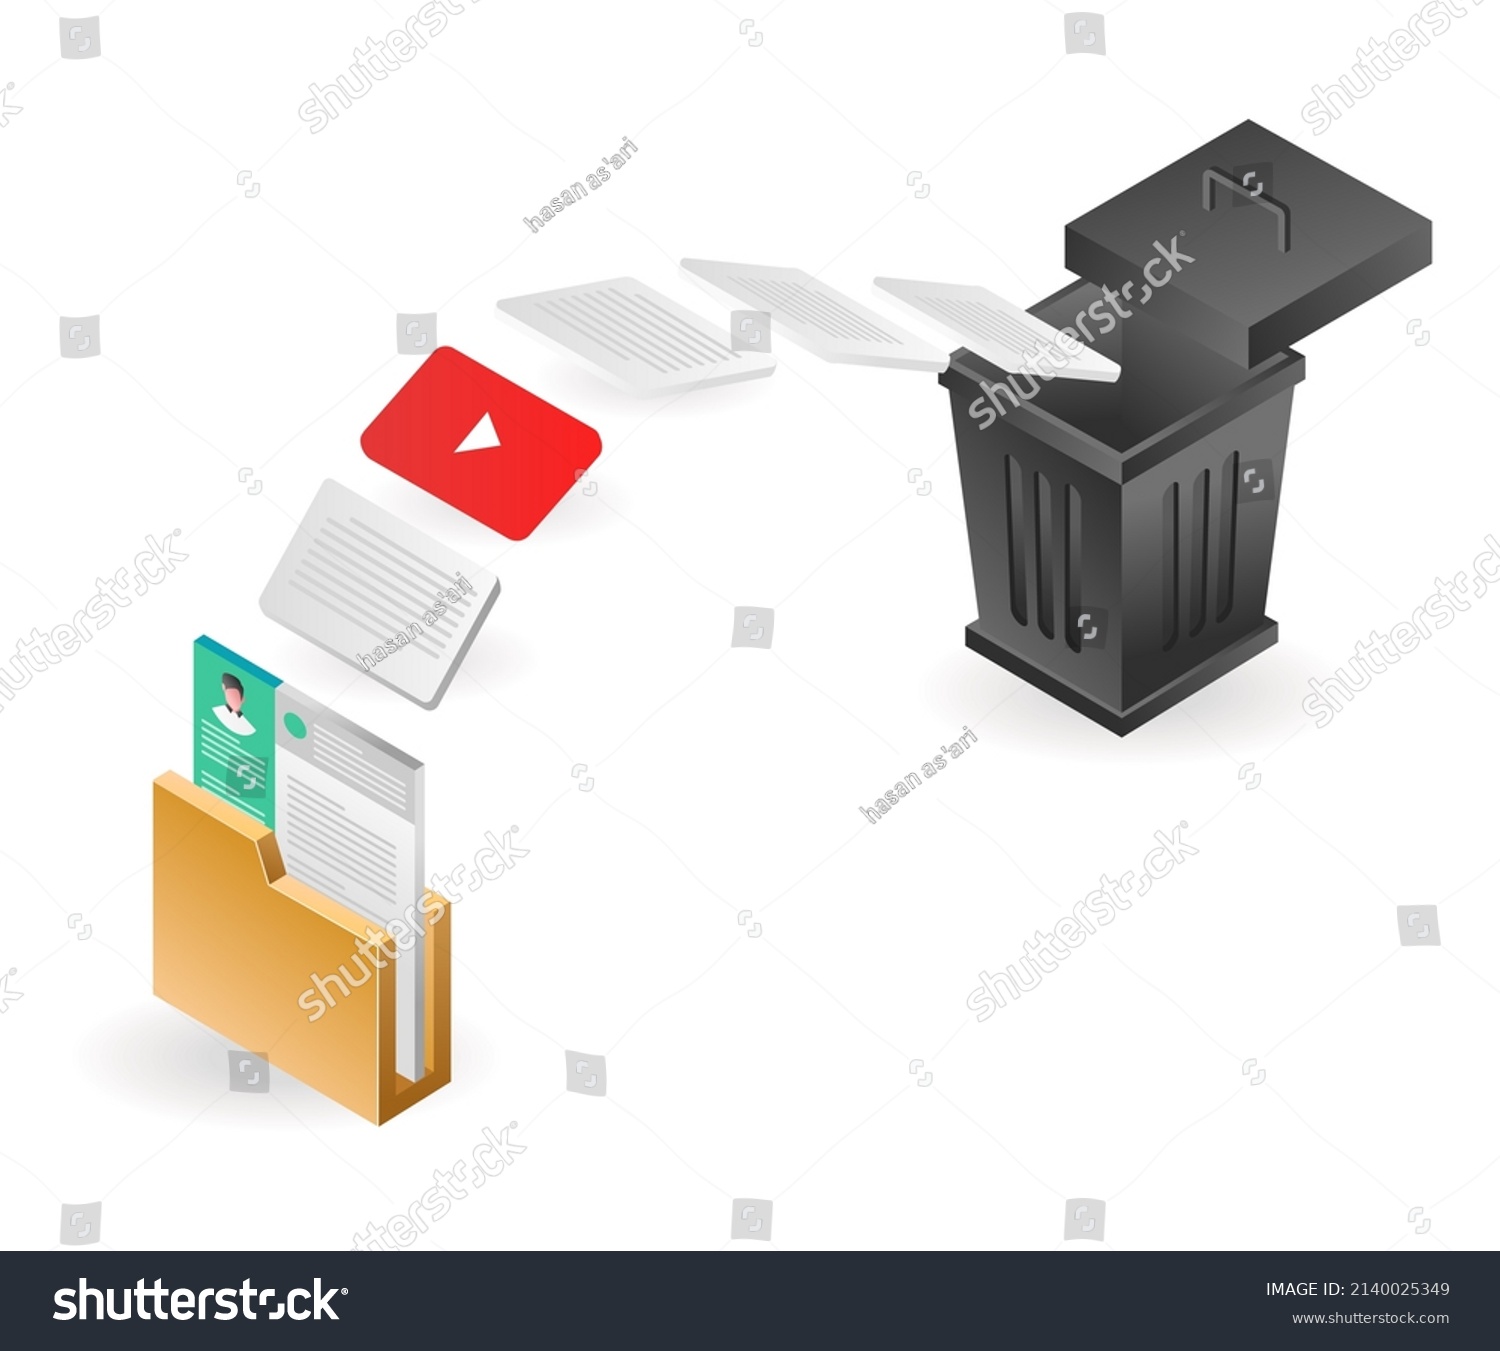 SVG of Landing page concept flat isometric illustration. wipe computer data svg